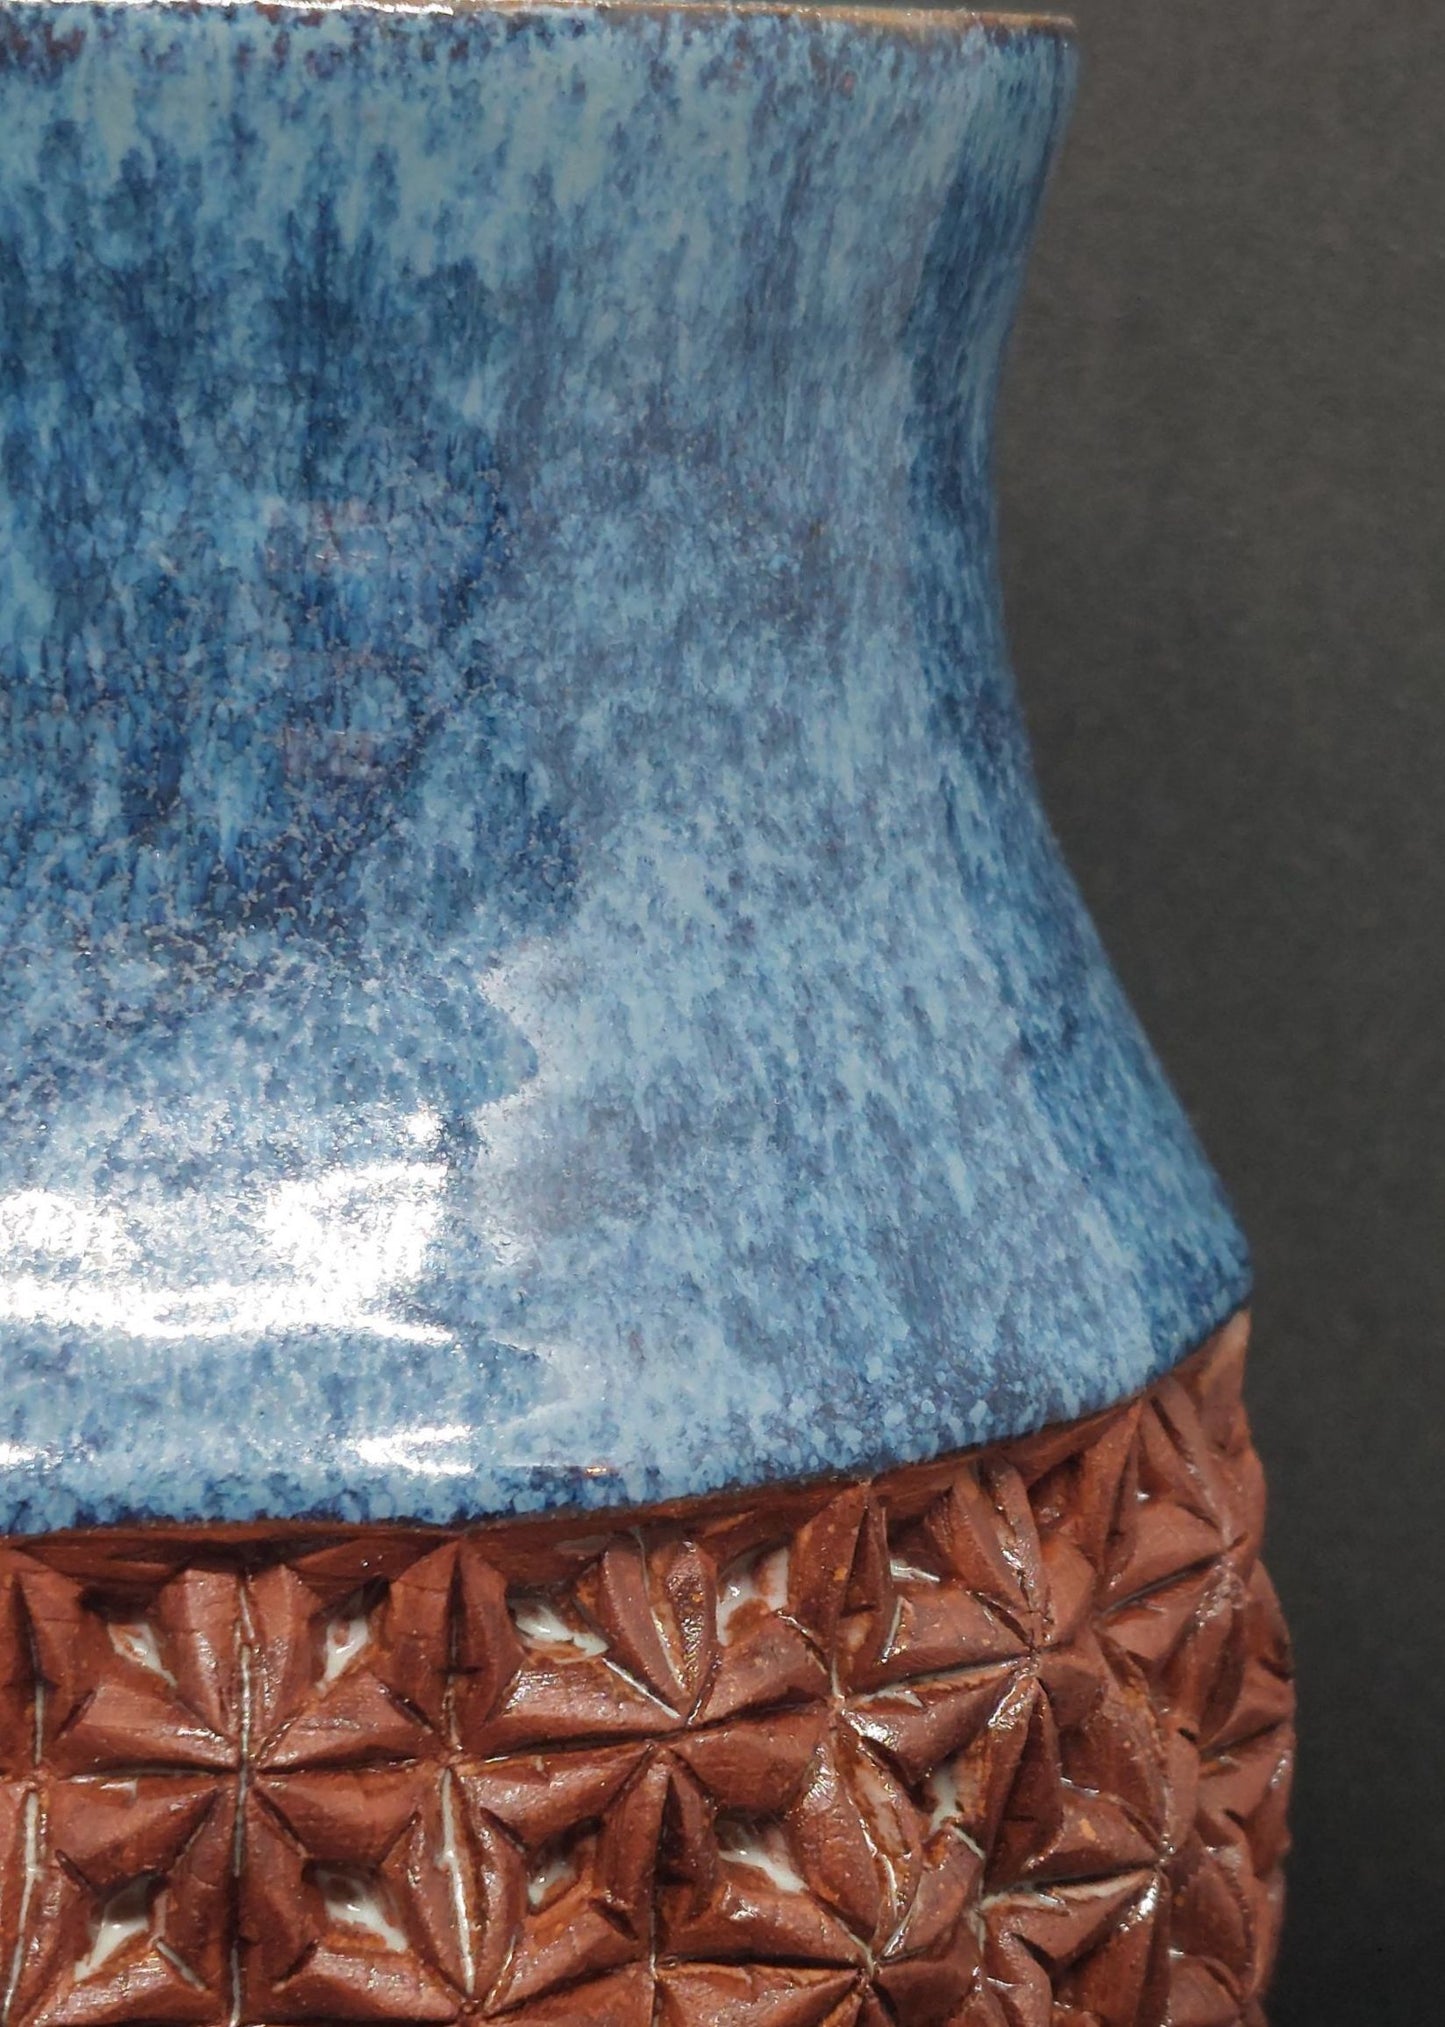 Blue vase on red clay - origami pattern